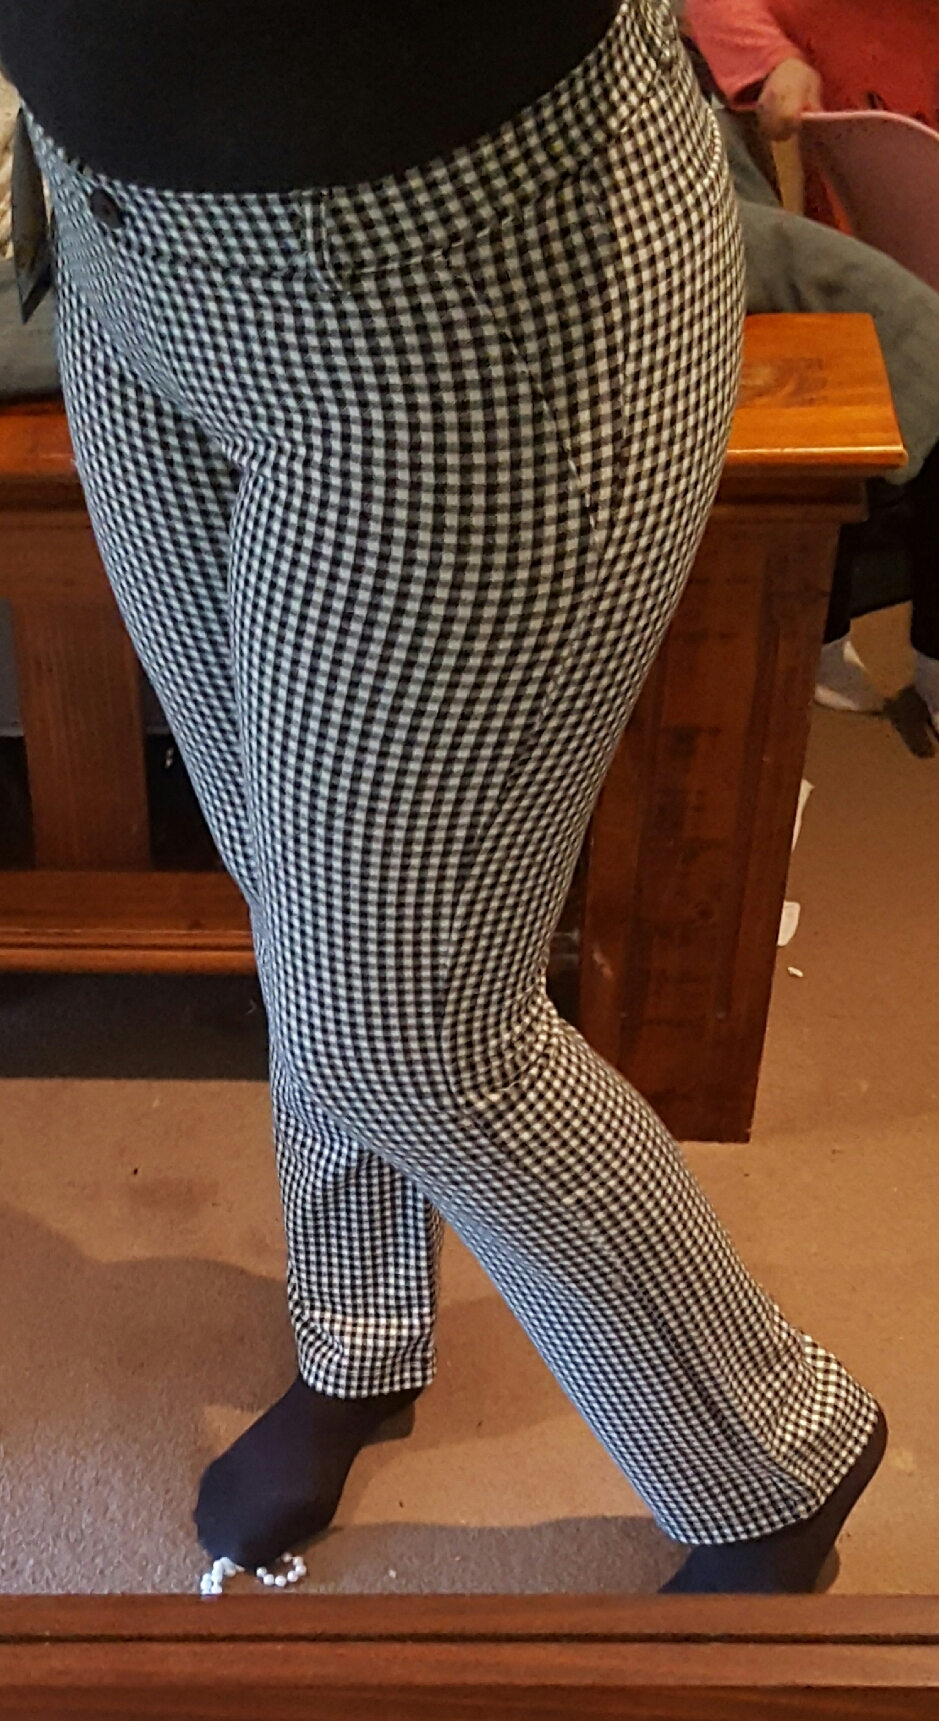 BetaBrand Dress Pants One Year Later - my 9 to 5 shoes